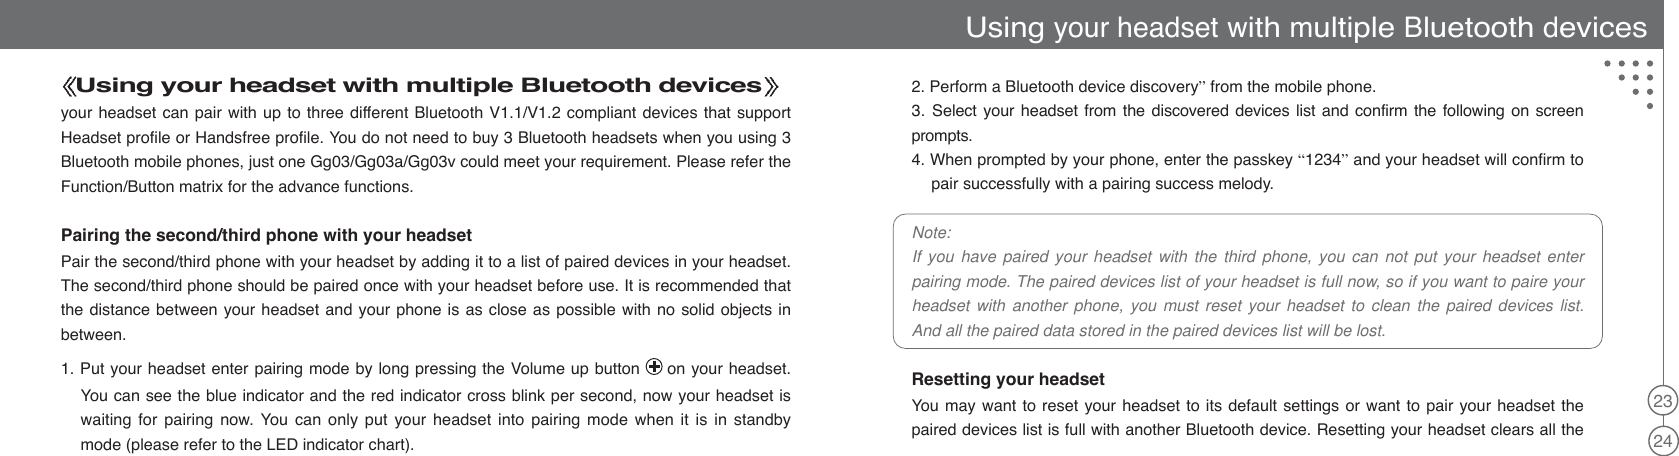 23242. Perform a Bluetooth device discovery”from the mobile phone.3. Select your headset from the discovered devices list and confirm the following on screenprompts.4. When prompted by your phone, enter the passkey “1234”and your headset will confirm topair successfully with a pairing success melody.Note:If you have paired your headset with the third phone, you can not put your headset enterpairing mode. The paired devices list of your headset is full now, so if you want to paire yourheadset with another phone, you must reset your headset to clean the paired devices list.And all the paired data stored in the paired devices list will be lost.Resetting your headsetYou may want to reset your headset to its default settings or want to pair your headset thepaired devices list is full with another Bluetooth device. Resetting your headset clears all theUsing your headset with multiple Bluetooth devicesyour headset can pair with up to three different Bluetooth V1.1/V1.2 compliant devices that supportHeadset profile or Handsfree profile. You do not need to buy 3 Bluetooth headsets when you using 3Bluetooth mobile phones, just one Gg03/Gg03a/Gg03v could meet your requirement. Please refer theFunction/Button matrix for the advance functions.Pairing the second/third phone with your headsetPair the second/third phone with your headset by adding it to a list of paired devices in your headset.The second/third phone should be paired once with your headset before use. It is recommended thatthe distance between your headset and your phone is as close as possible with no solid objects inbetween.1. Put your headset enter pairing mode by long pressing the Volume up button on your headset.You can see the blue indicator and the red indicator cross blink per second, now your headset iswaiting for pairing now. You can only put your headset into pairing mode when it is in standbymode (please refer to the LED indicator chart).Using your headset with multiple Bluetooth devices